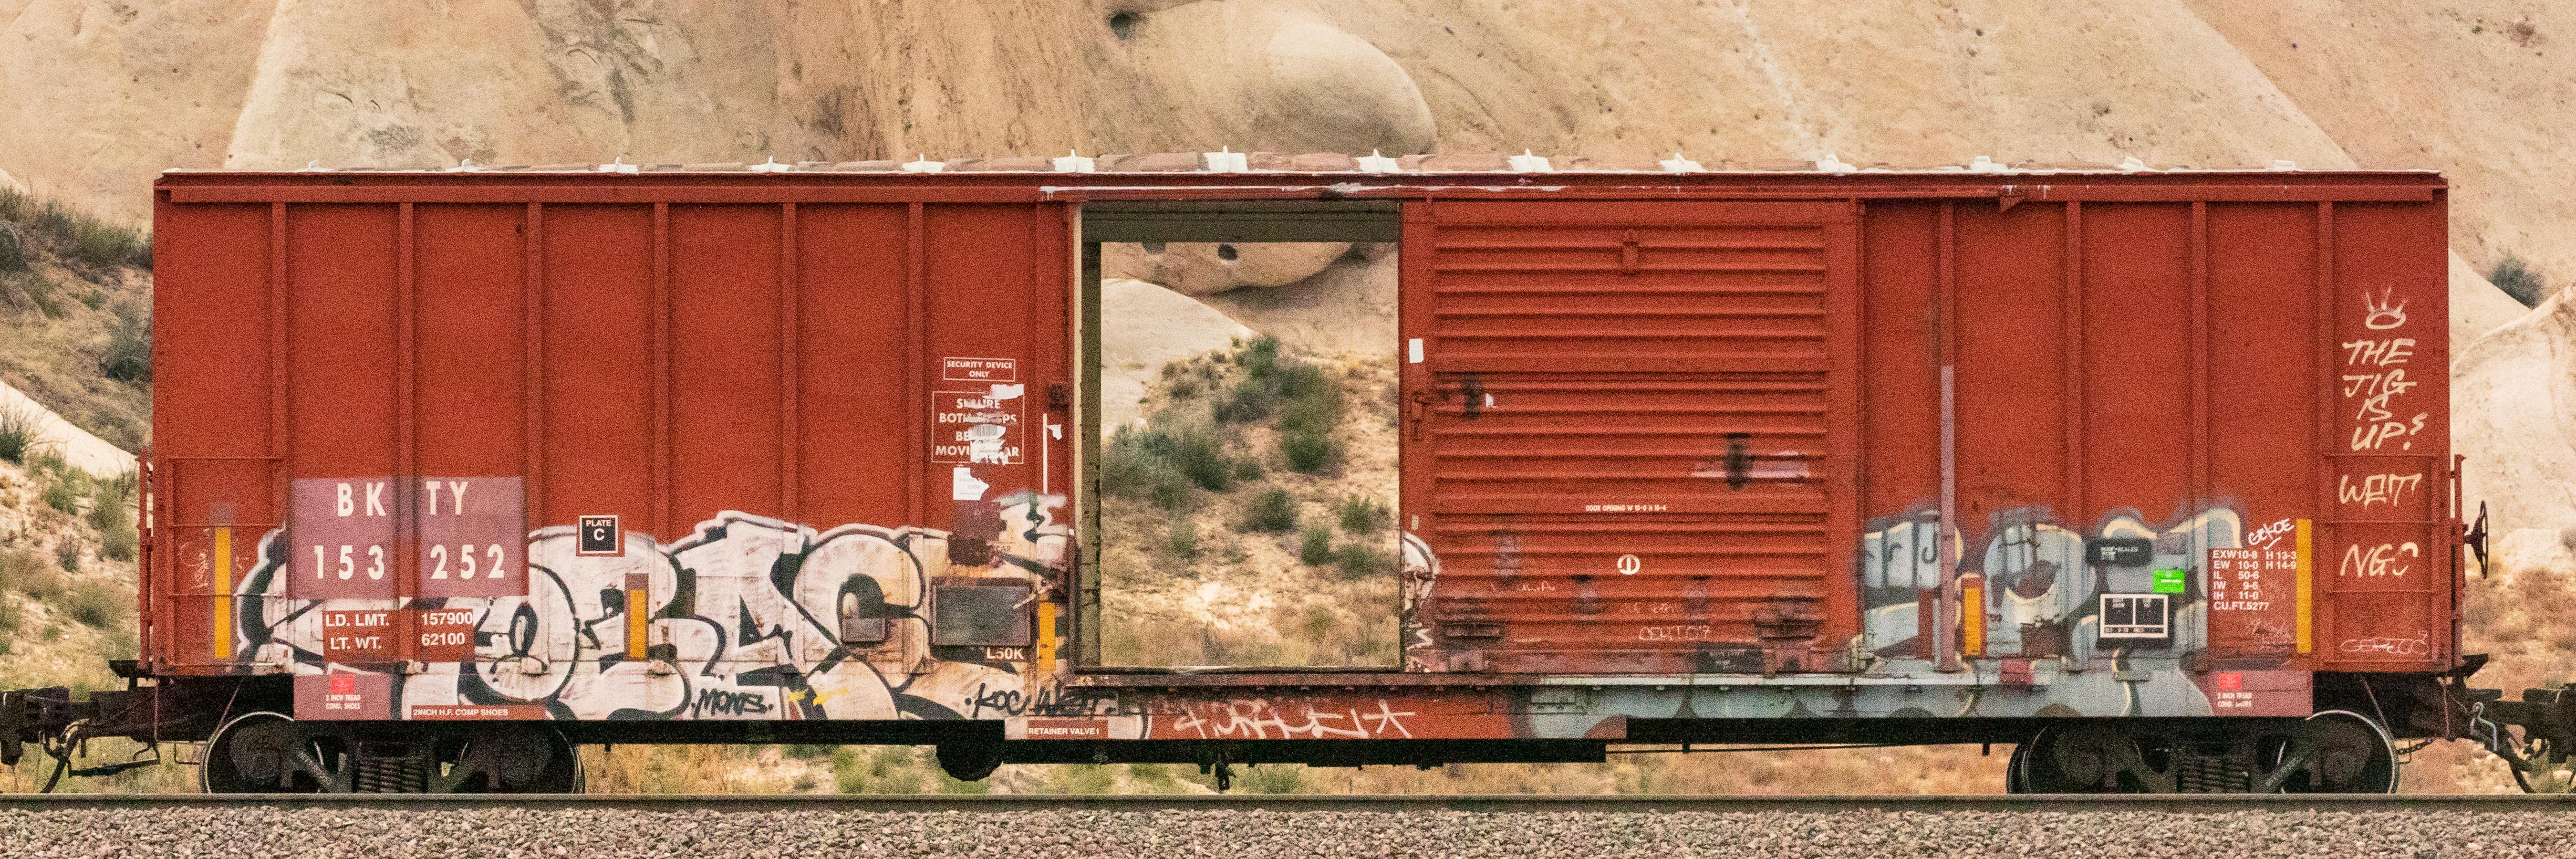 Stephen Mallon Landscape Photograph - Passing Freight -Contemporary color photograph "BKTY 15325" freight train series